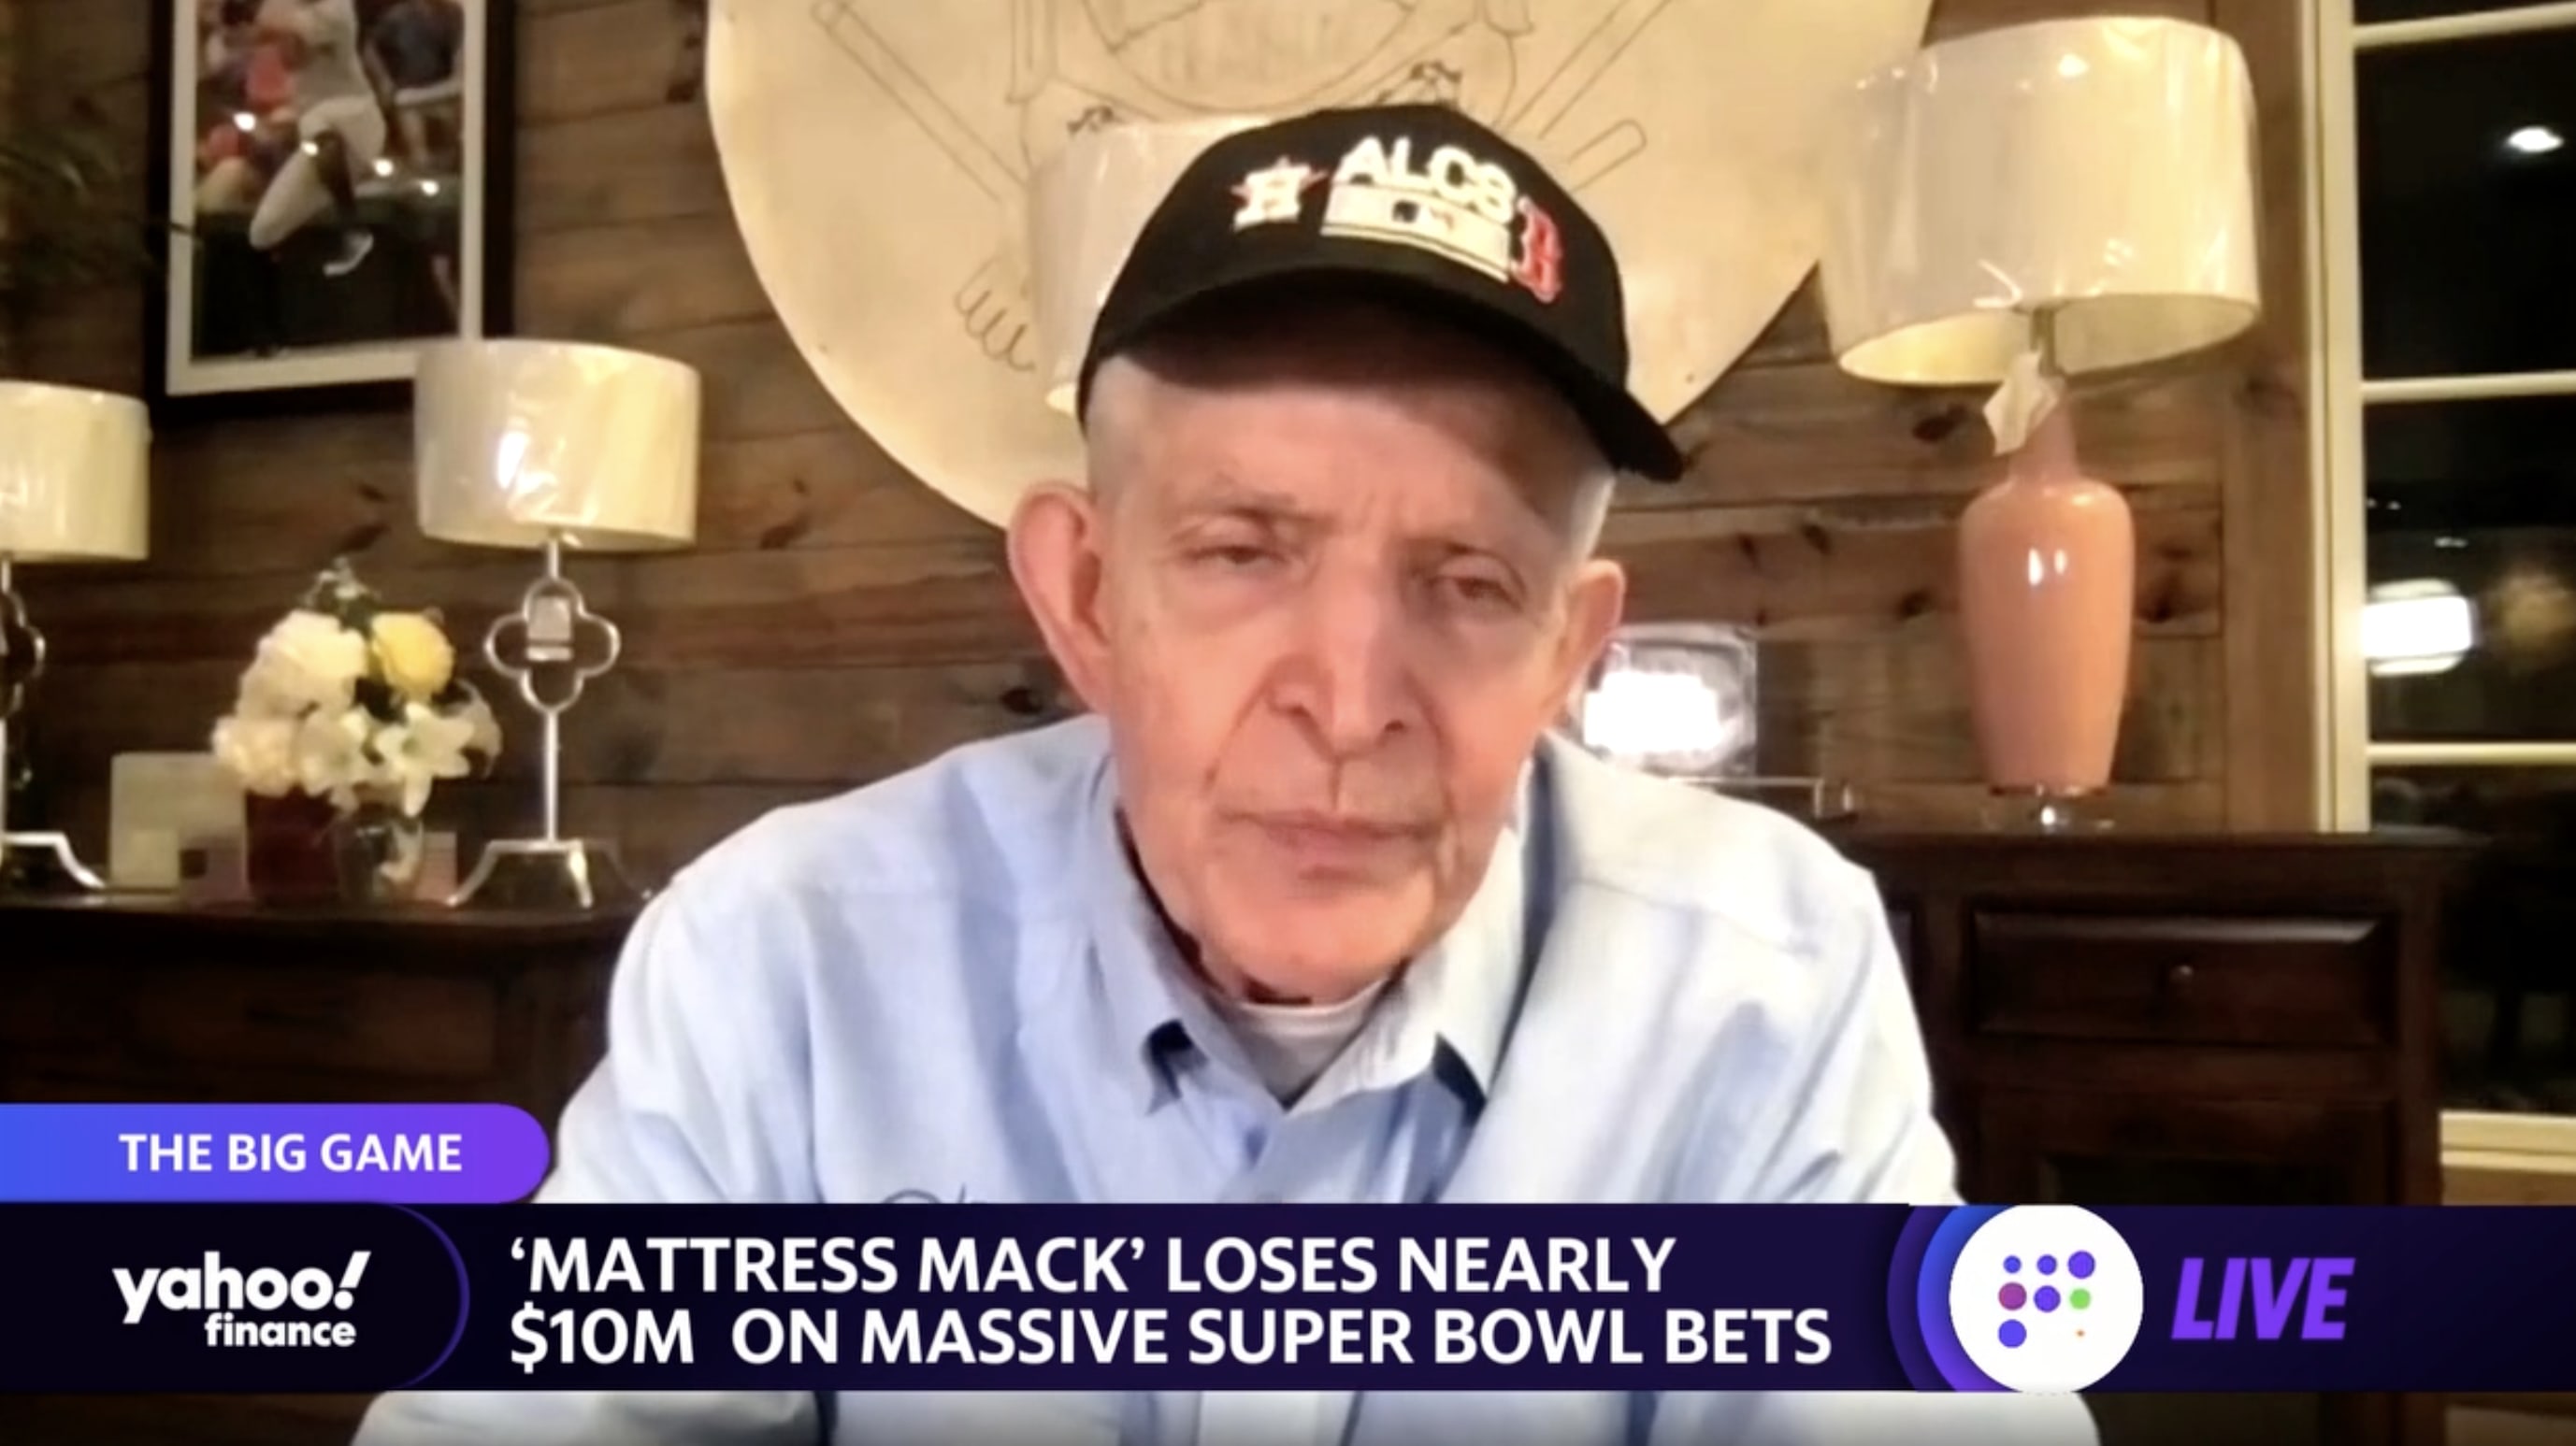 Mattress Mack' lost nearly $10M on Super Bowl bets: 'The highs and